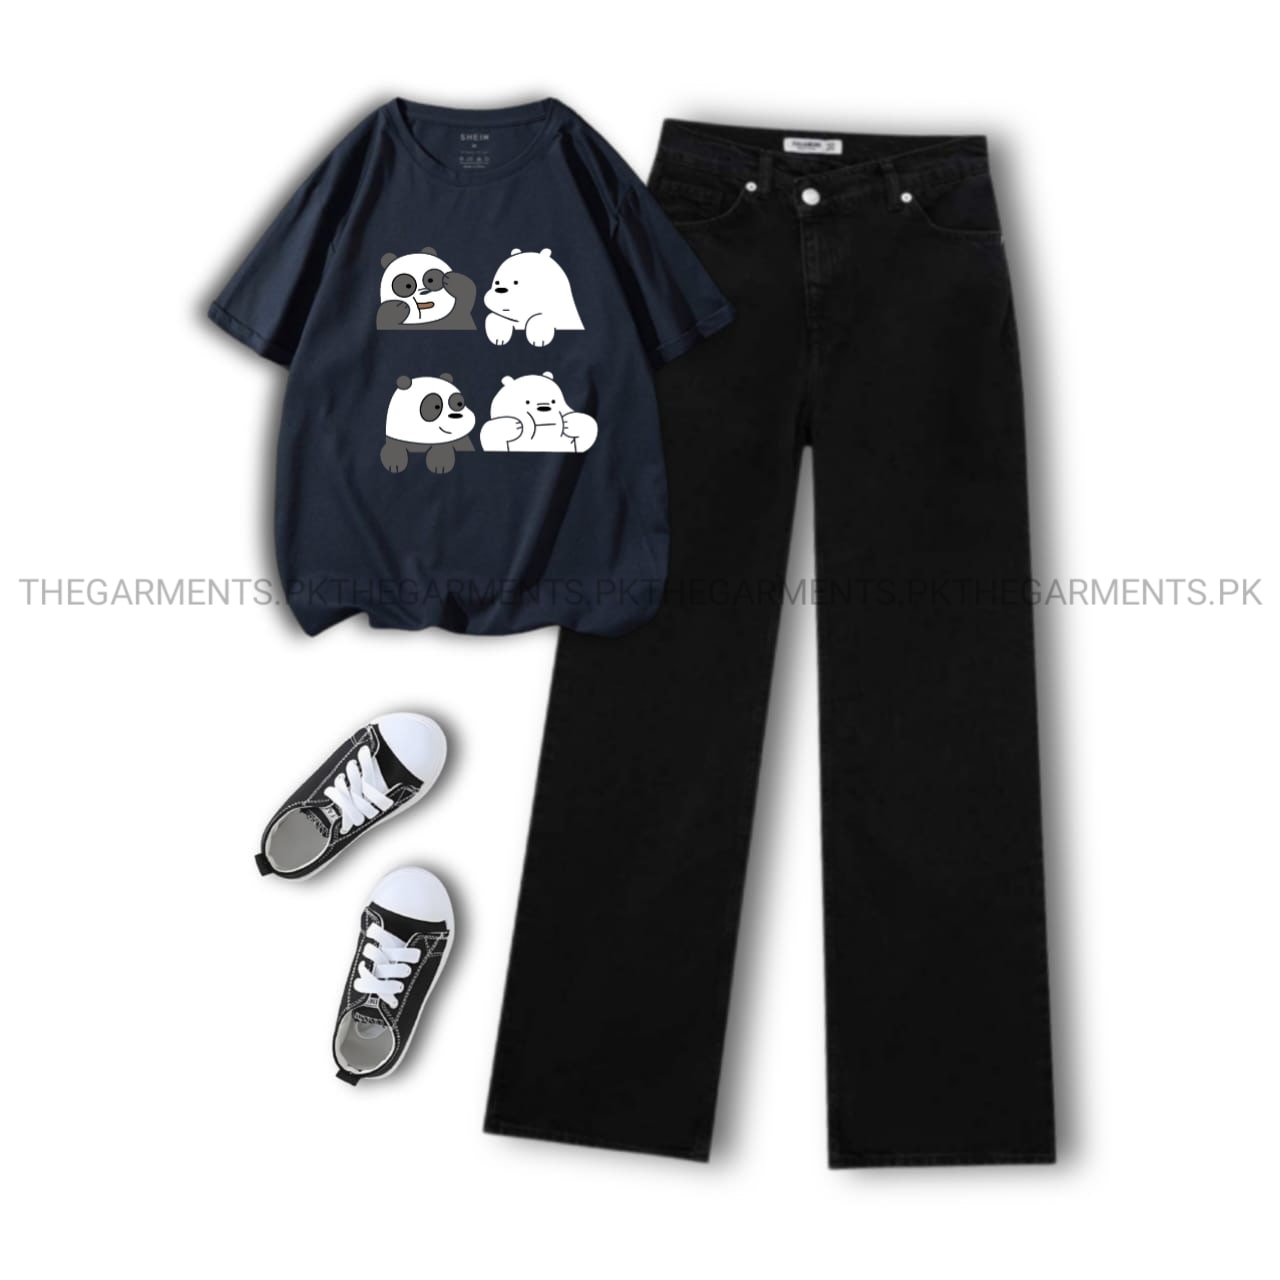 FOUR BEAR NAVY BLUE T-SHIRT WITH BLACK WIDE LEG JEANS